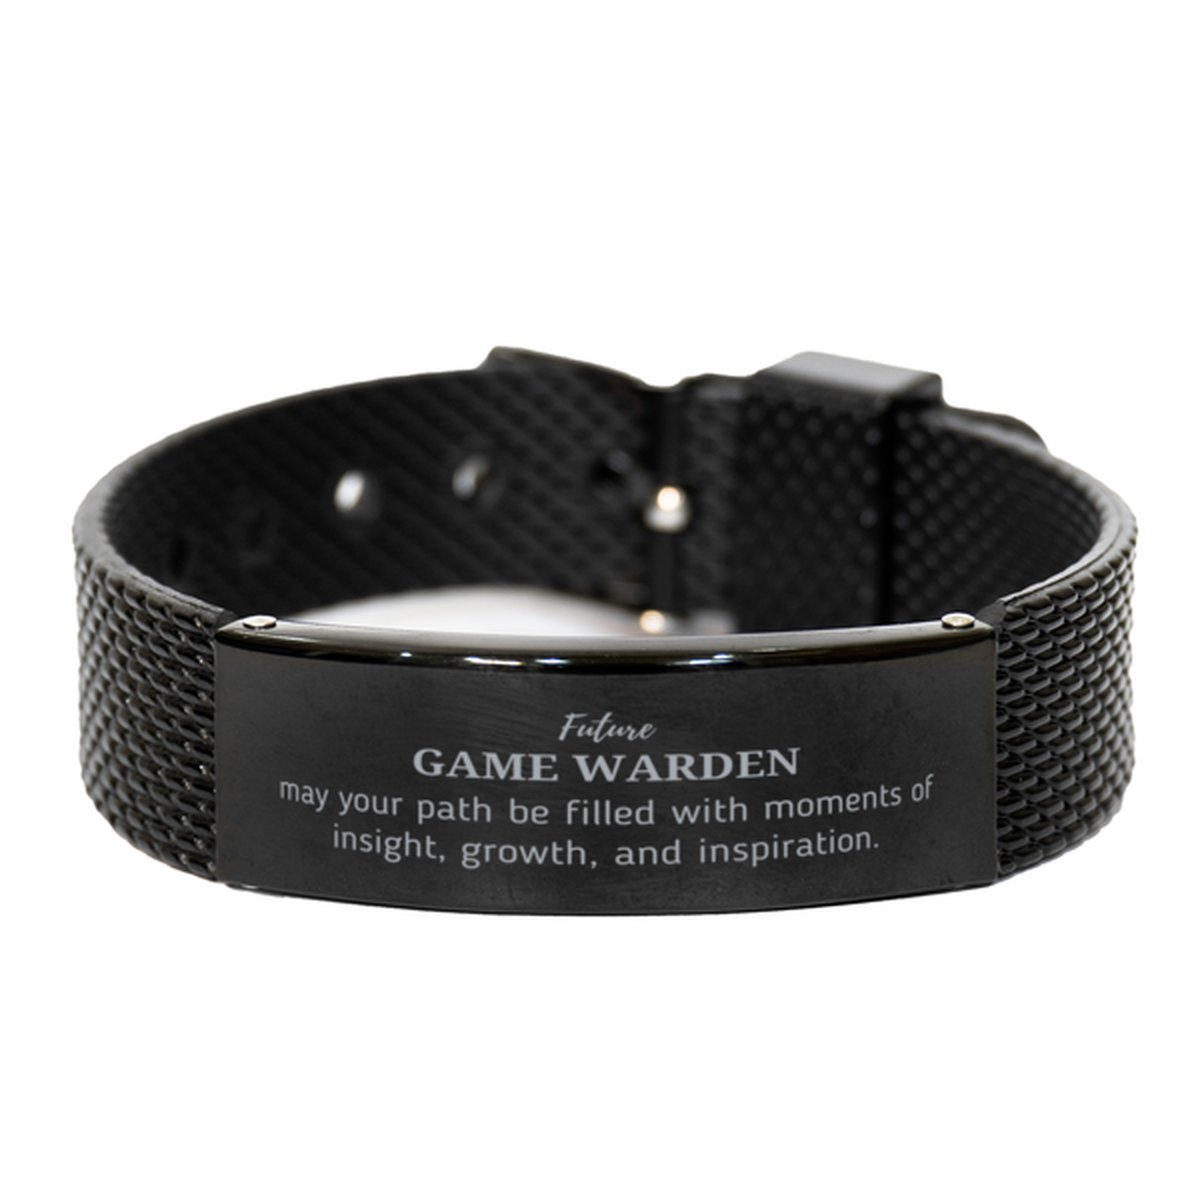 Future Game Warden Gifts, May your path be filled with moments of insight, Graduation Gifts for New Game Warden, Christmas Unique Black Shark Mesh Bracelet For Men, Women, Friends